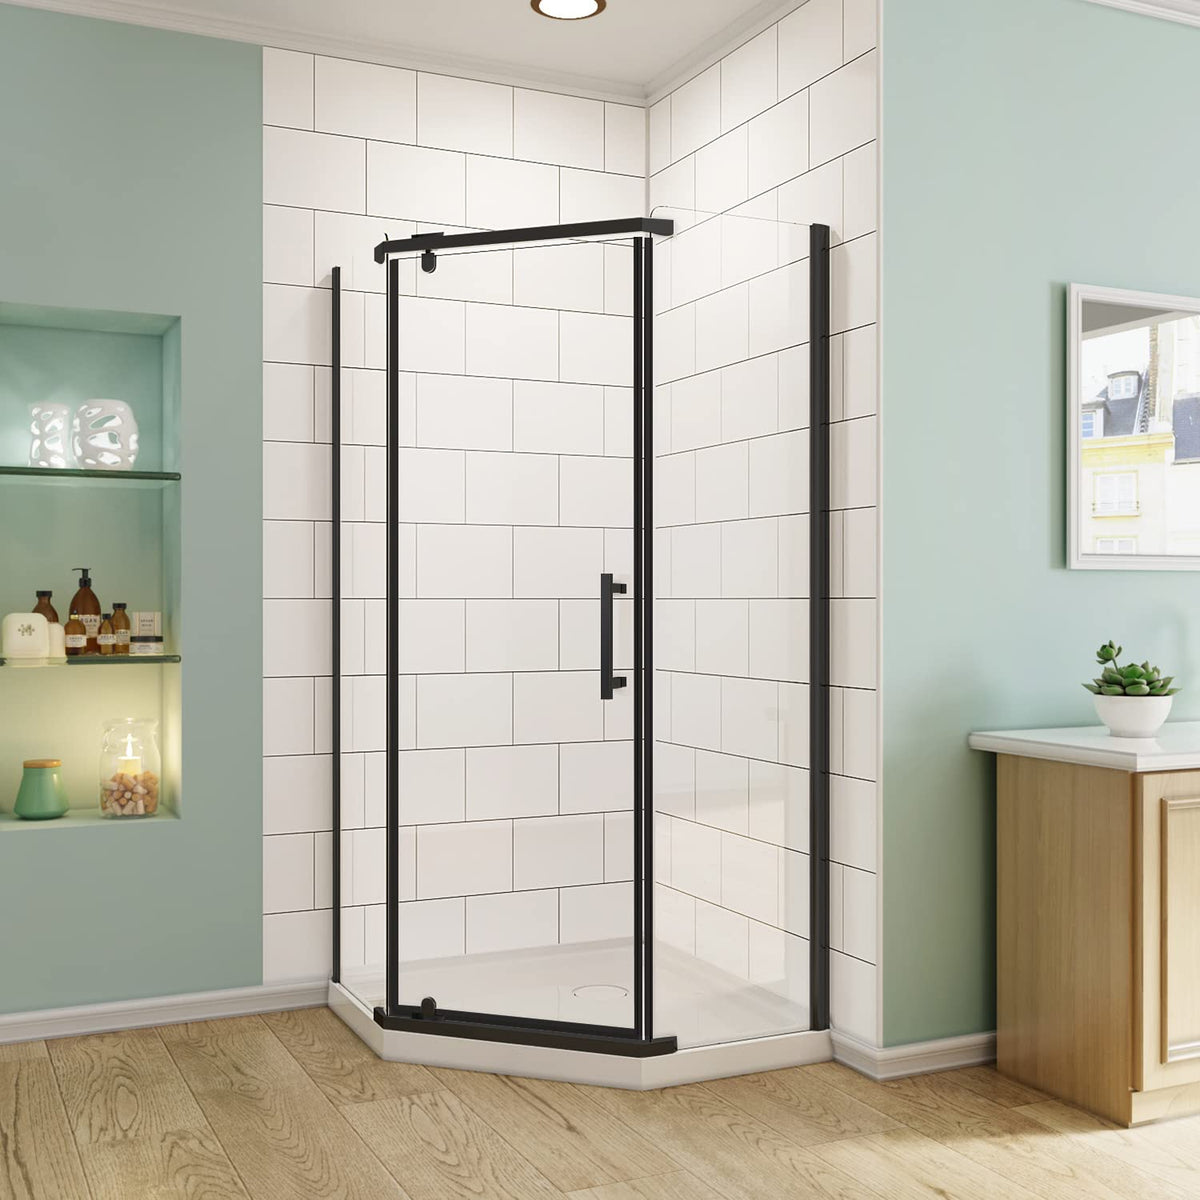 SUNNY SHOWER Pivot Enclosures With Pivot Door 36.7 in. W x 36.7 in. D x 71.8 in. H Black Finish